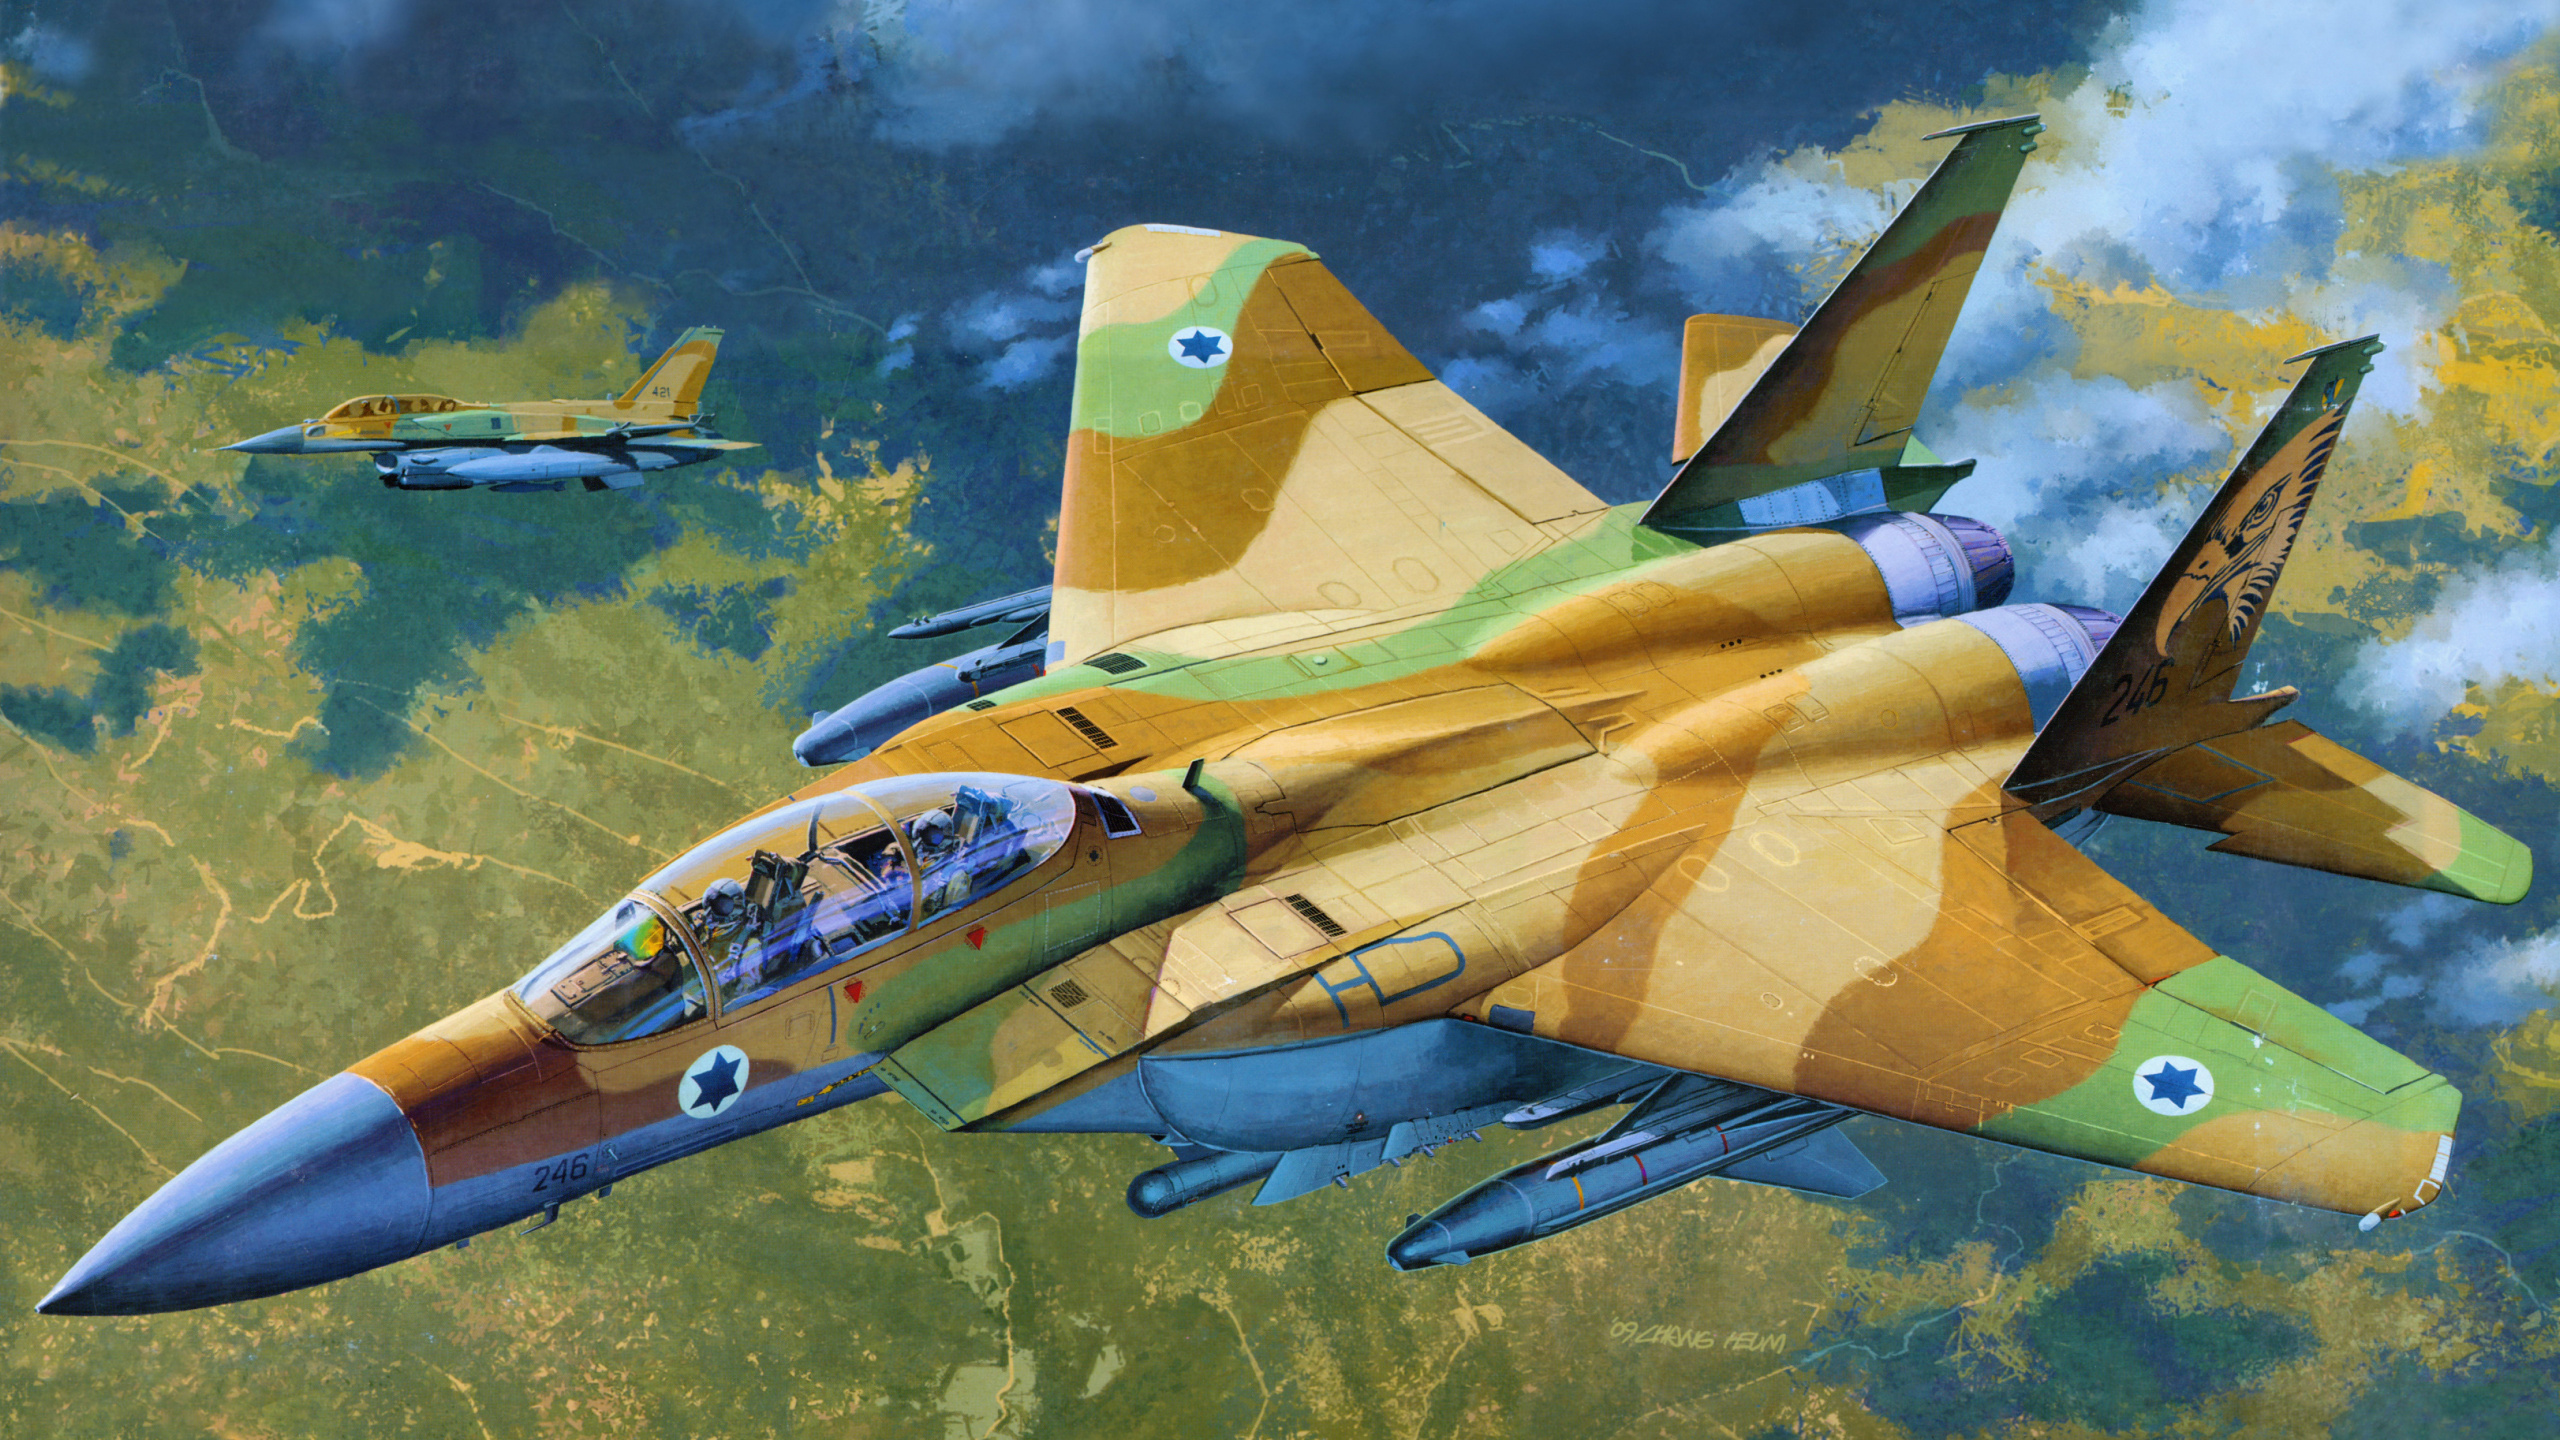 Yellow and Blue Jet Plane. Wallpaper in 2560x1440 Resolution